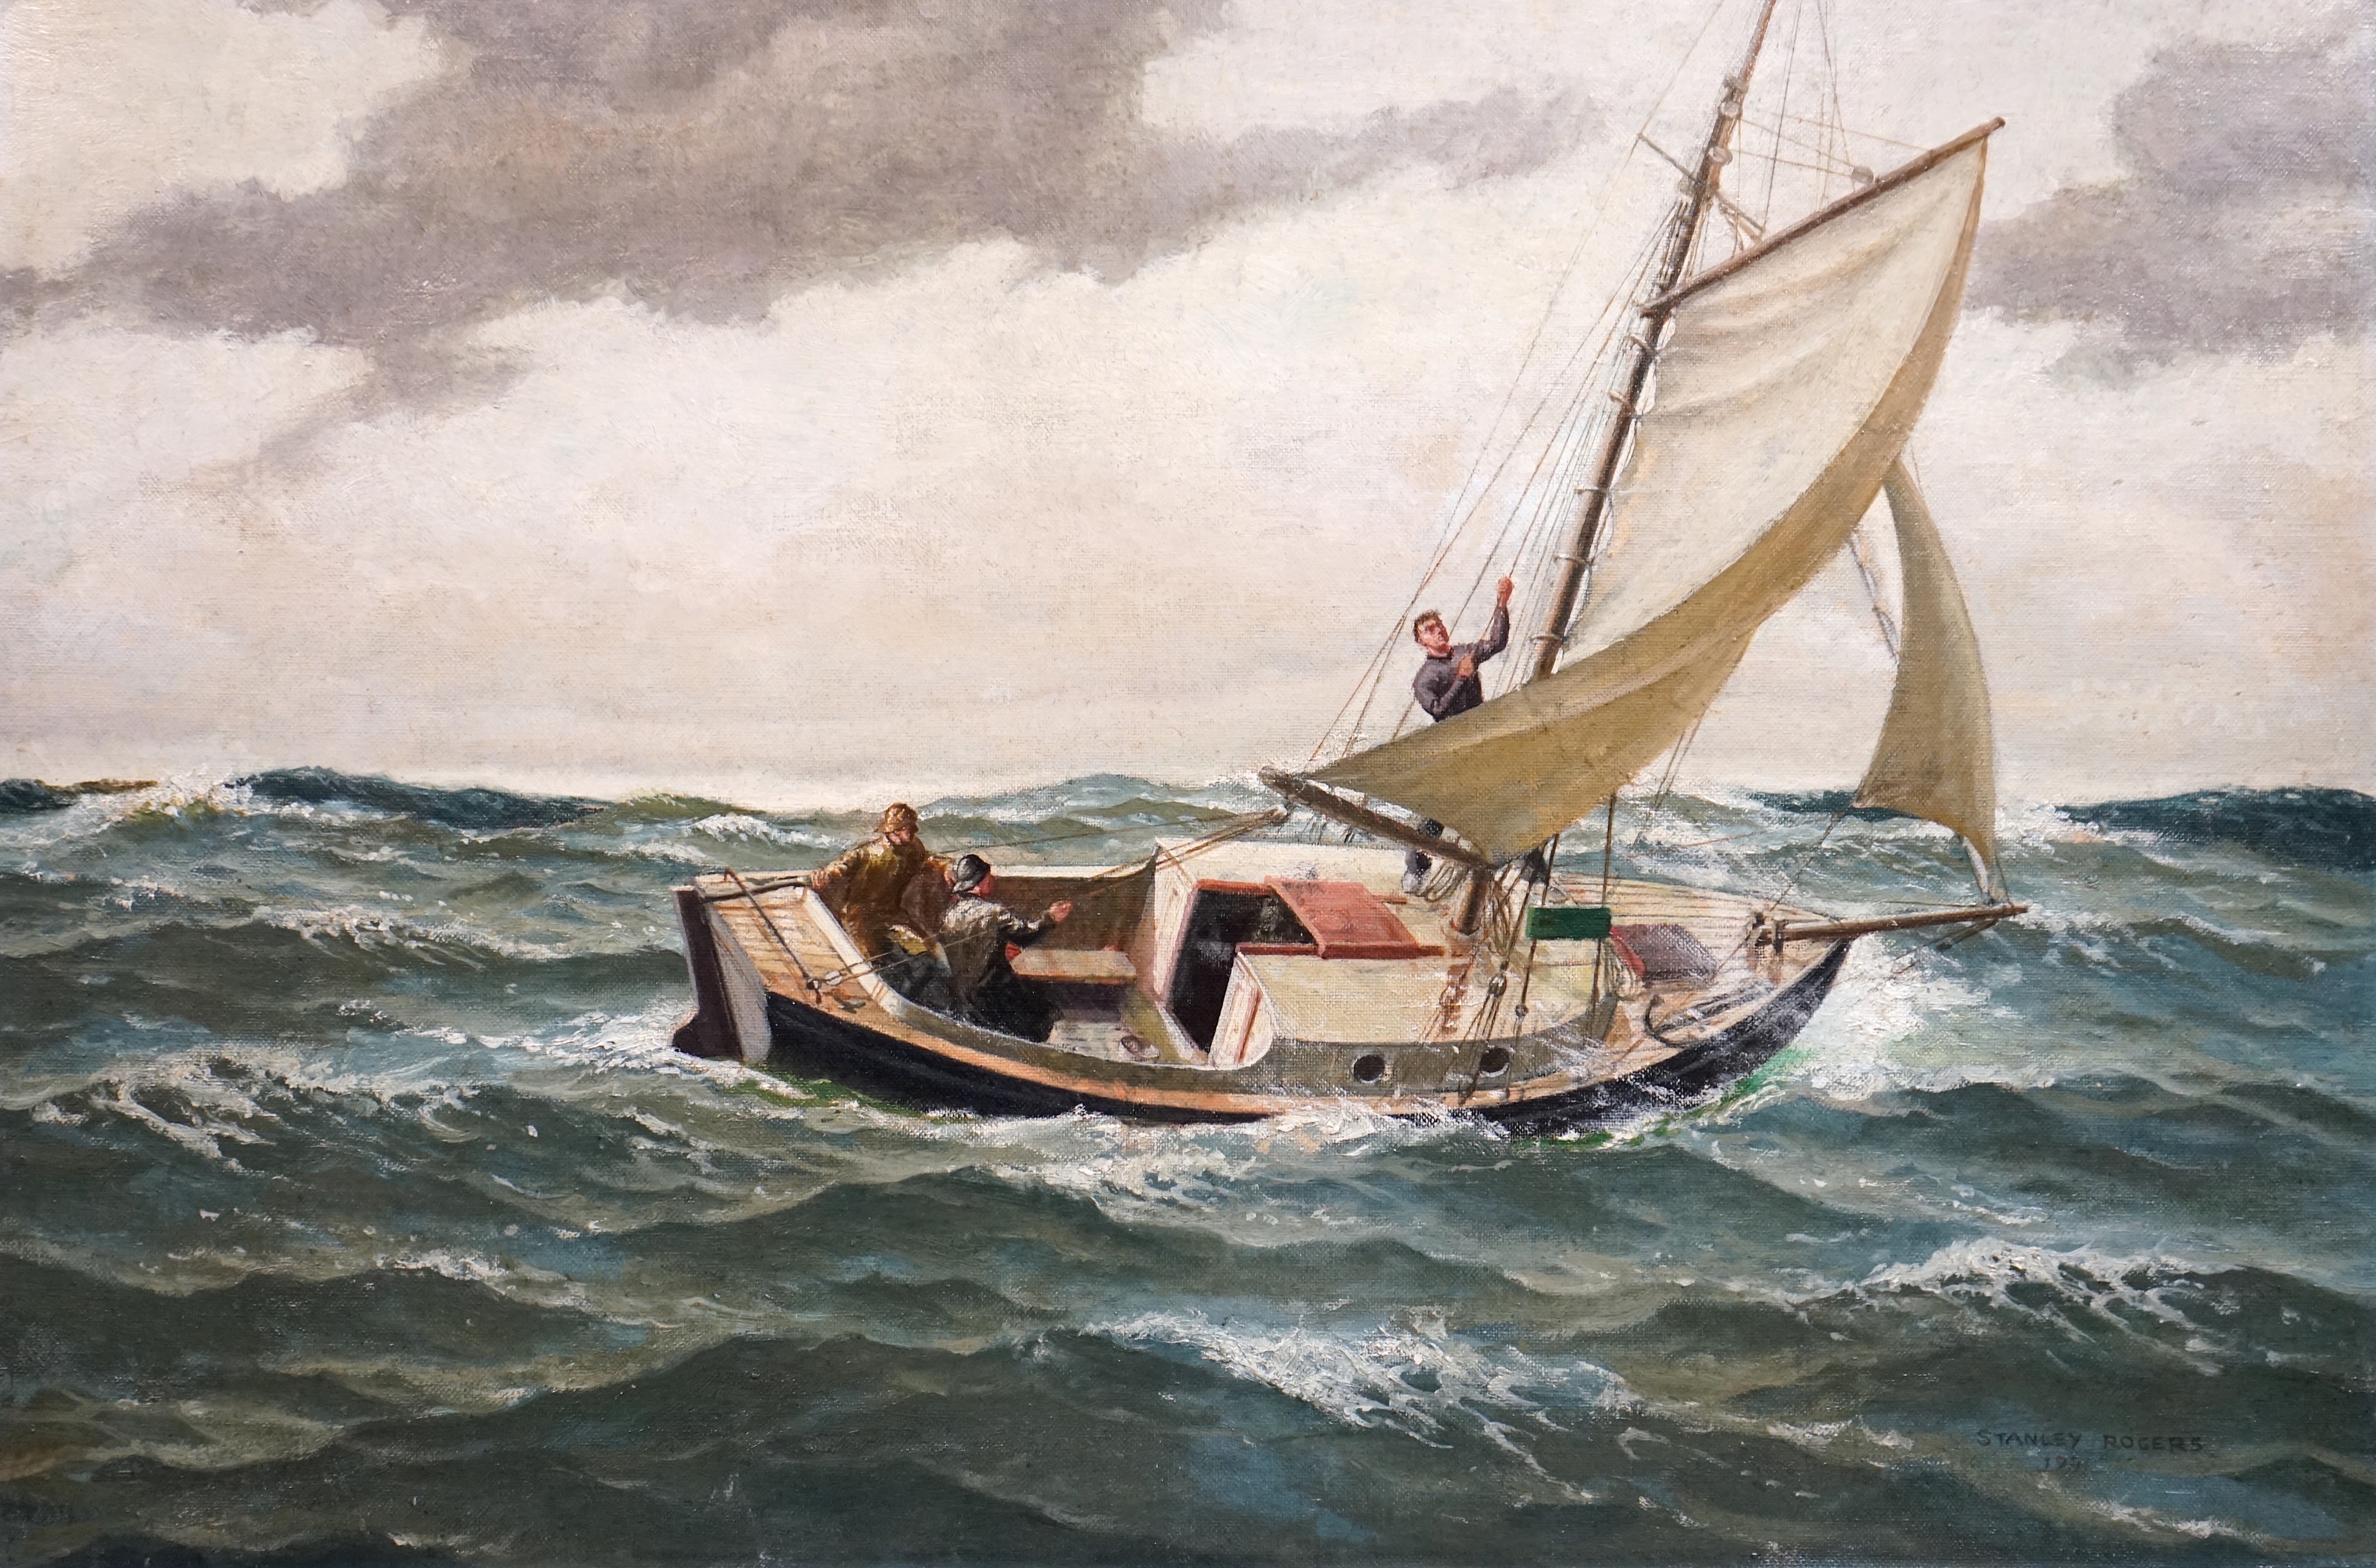 Stanley Rogers RSMA, 'This is the life', Yachtsmen at sea, oil on board, 50 x 77cm, unframed